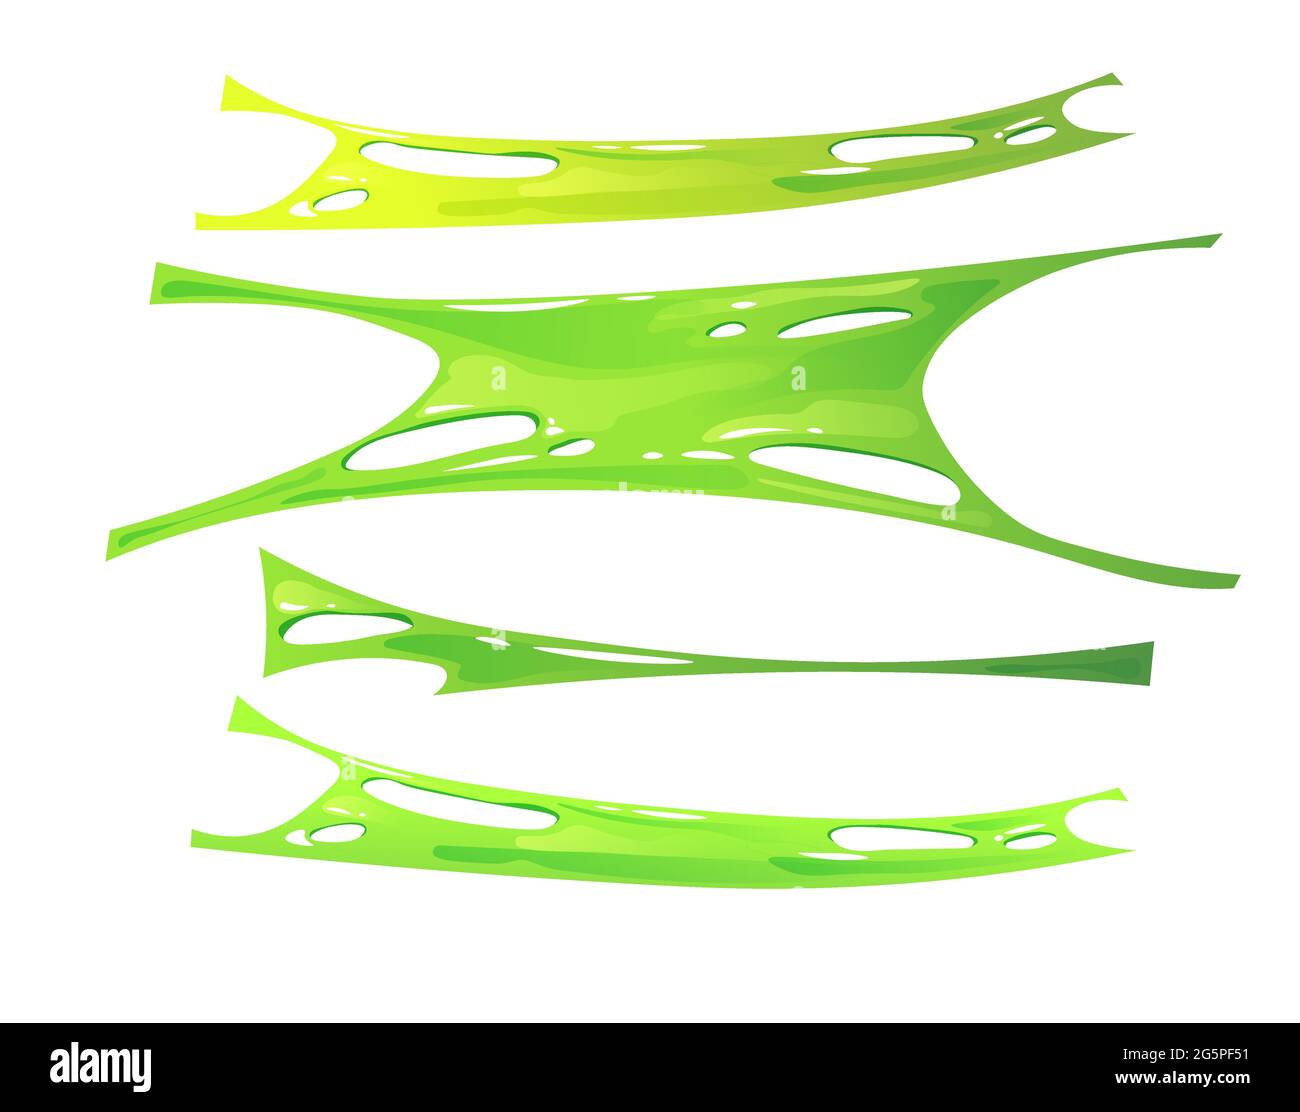 Stretched green slime. Kids' sensory toy. Cartoon vector illustration. Stock Vector